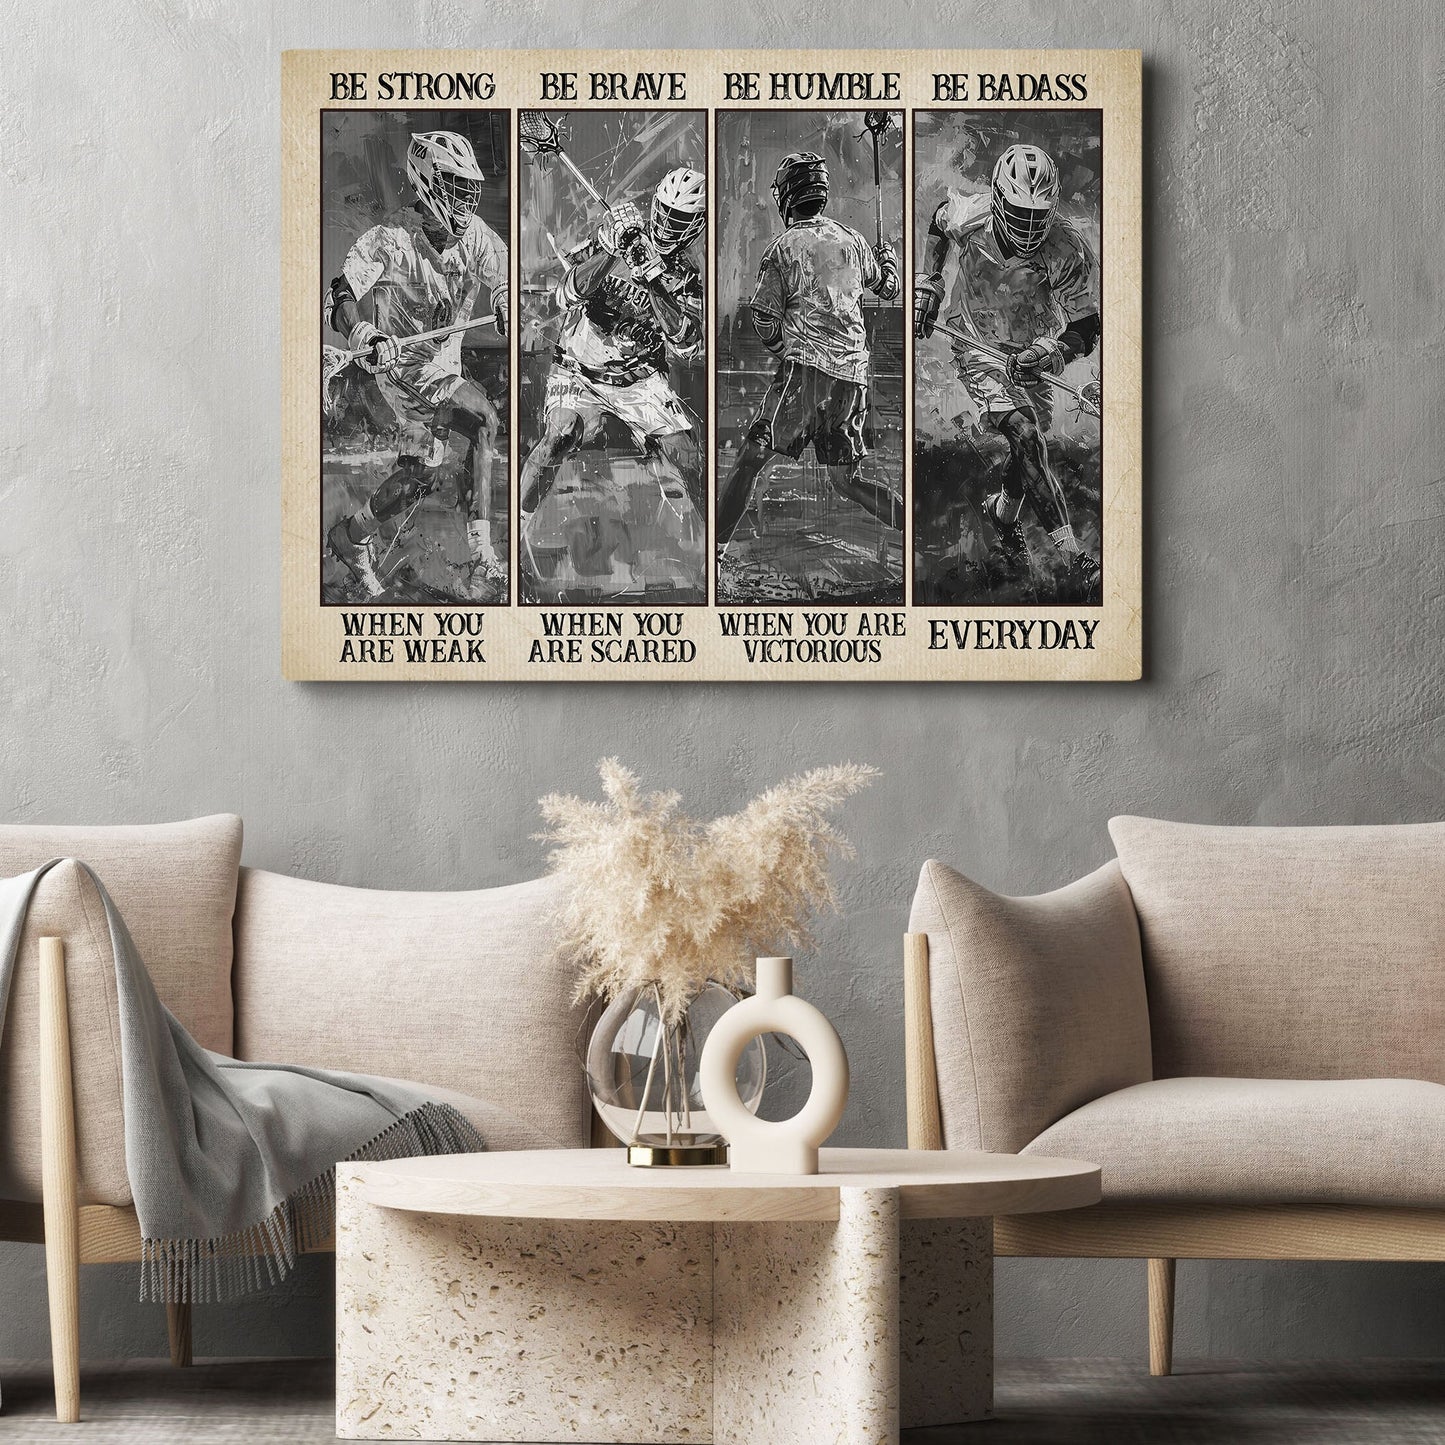 Be Strong Be Brave Be Humble Be Badass, Lacrosse Boy Canvas Painting, Inspirational Quotes Lacrosse Wall Art Decor, Poster Gift For Lacrosse Lovers